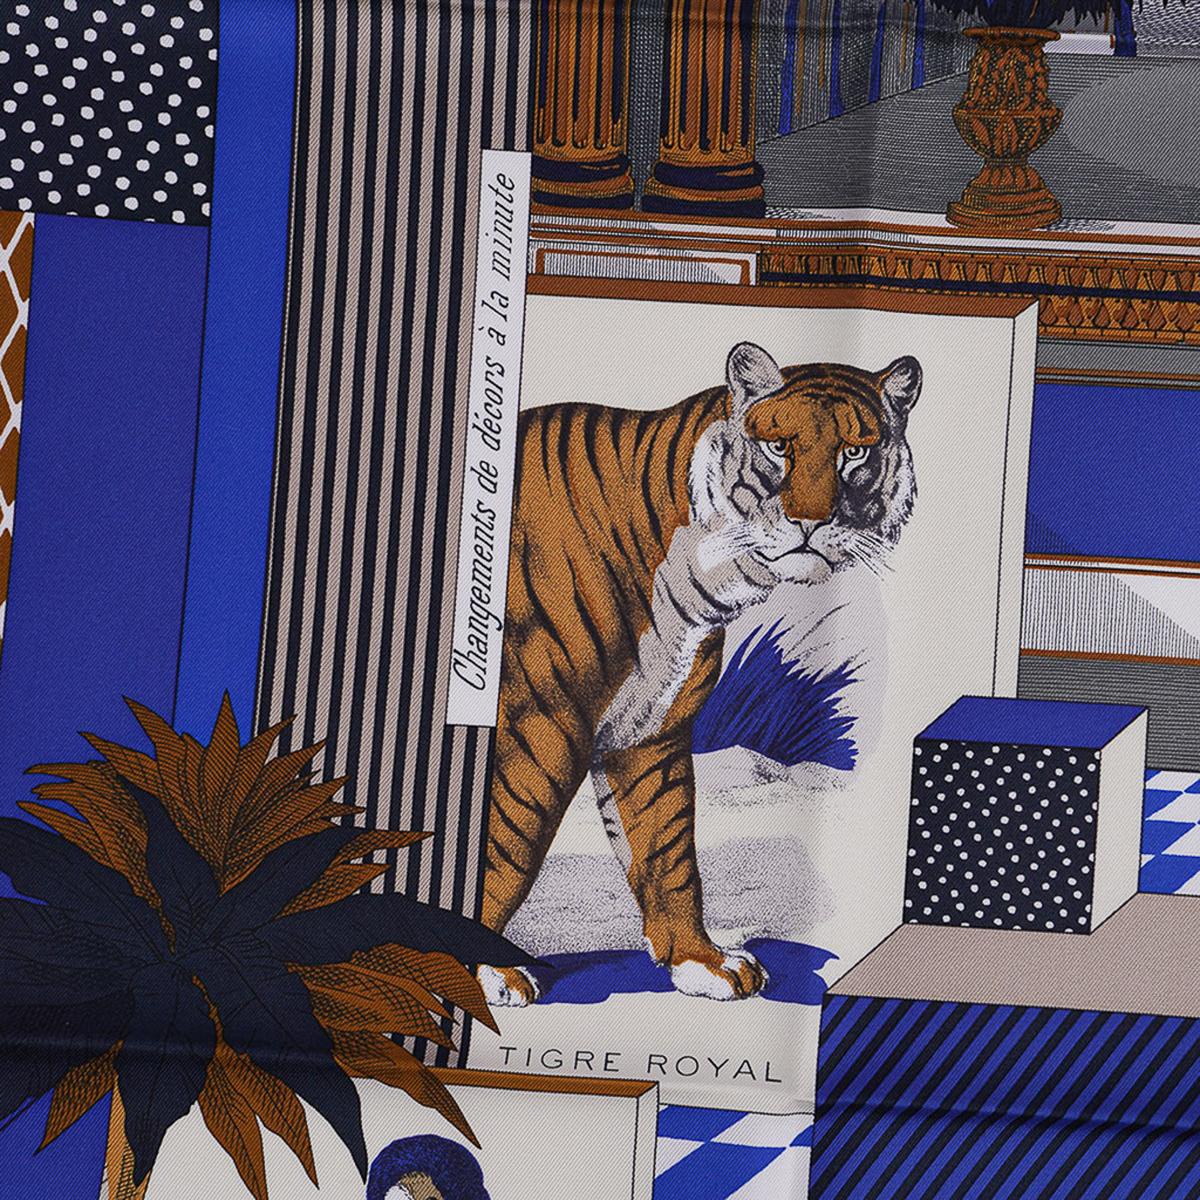 Mightychic offers an Hermes Grand Theatre Nouveau scarf featured in  Bleu Royal, Mordore and Blanc.
This exquisite scarf is a must have for any Hermes collector.
This fabulous print is designed by Gianpaolo Pagni and is a play on Epinal imagery